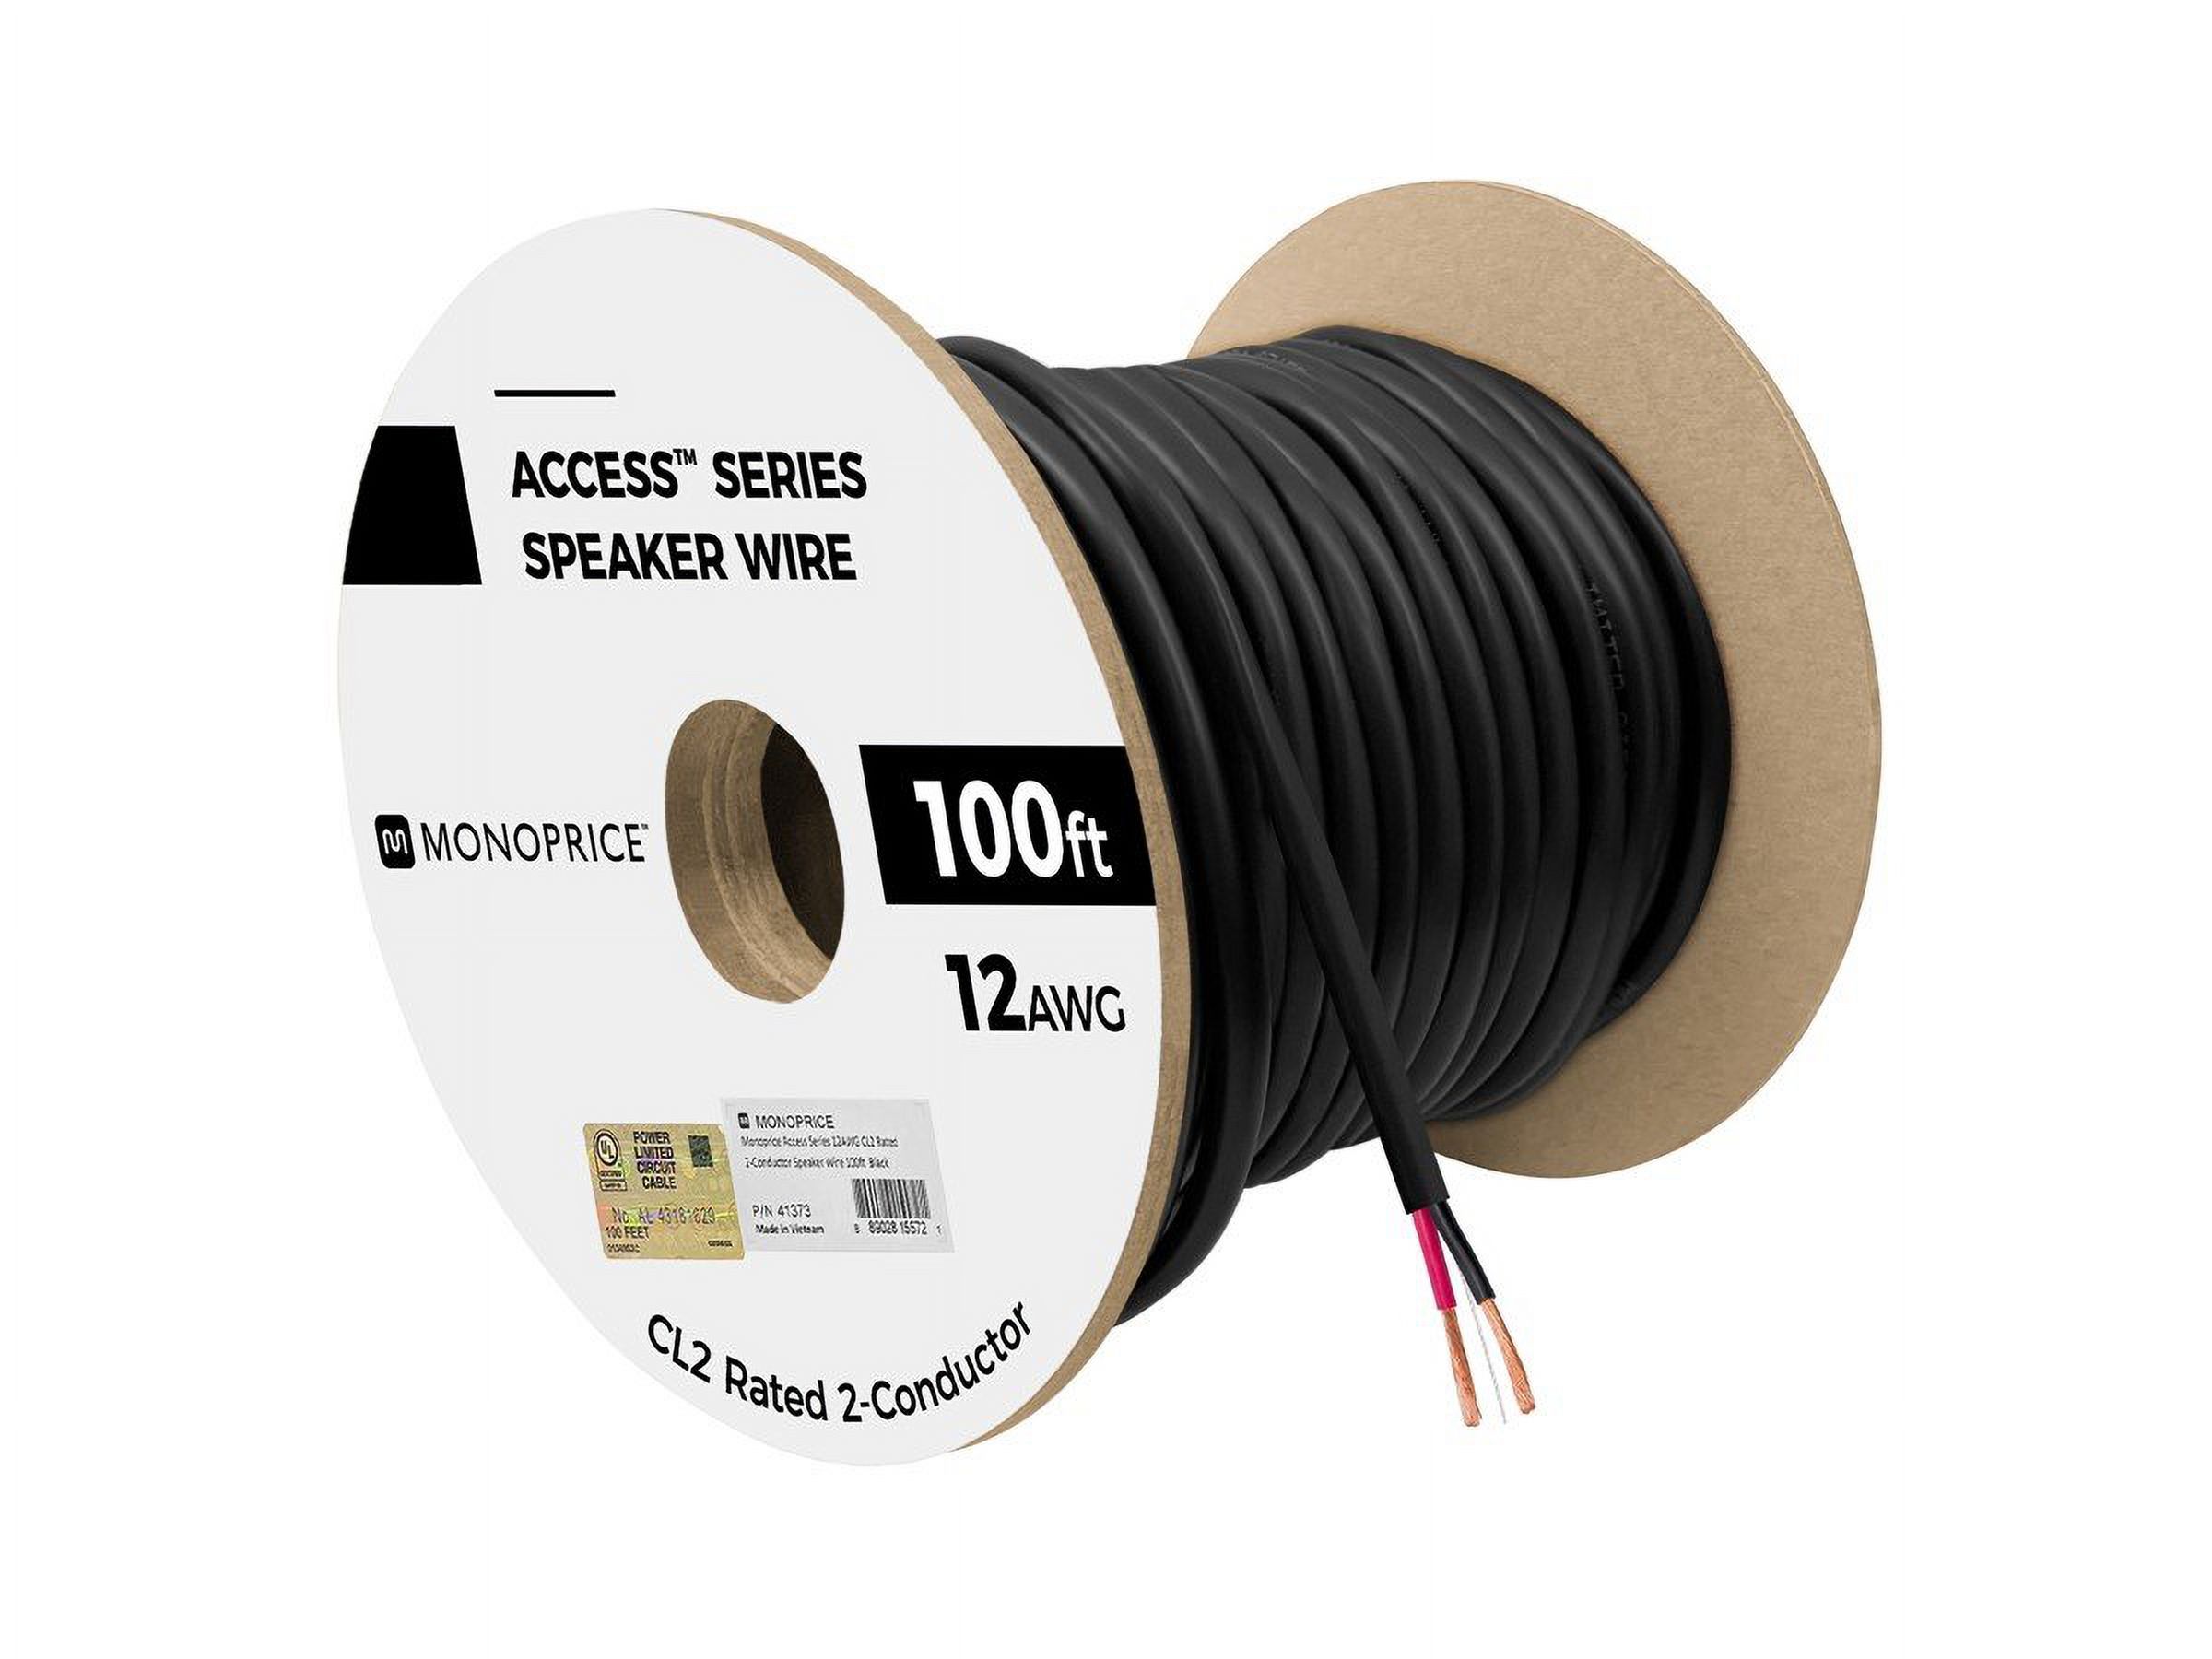 Monoprice Speaker Wire, CL2 Rated, 2-Conductor, 12AWG, 100ft, Black - image 5 of 6